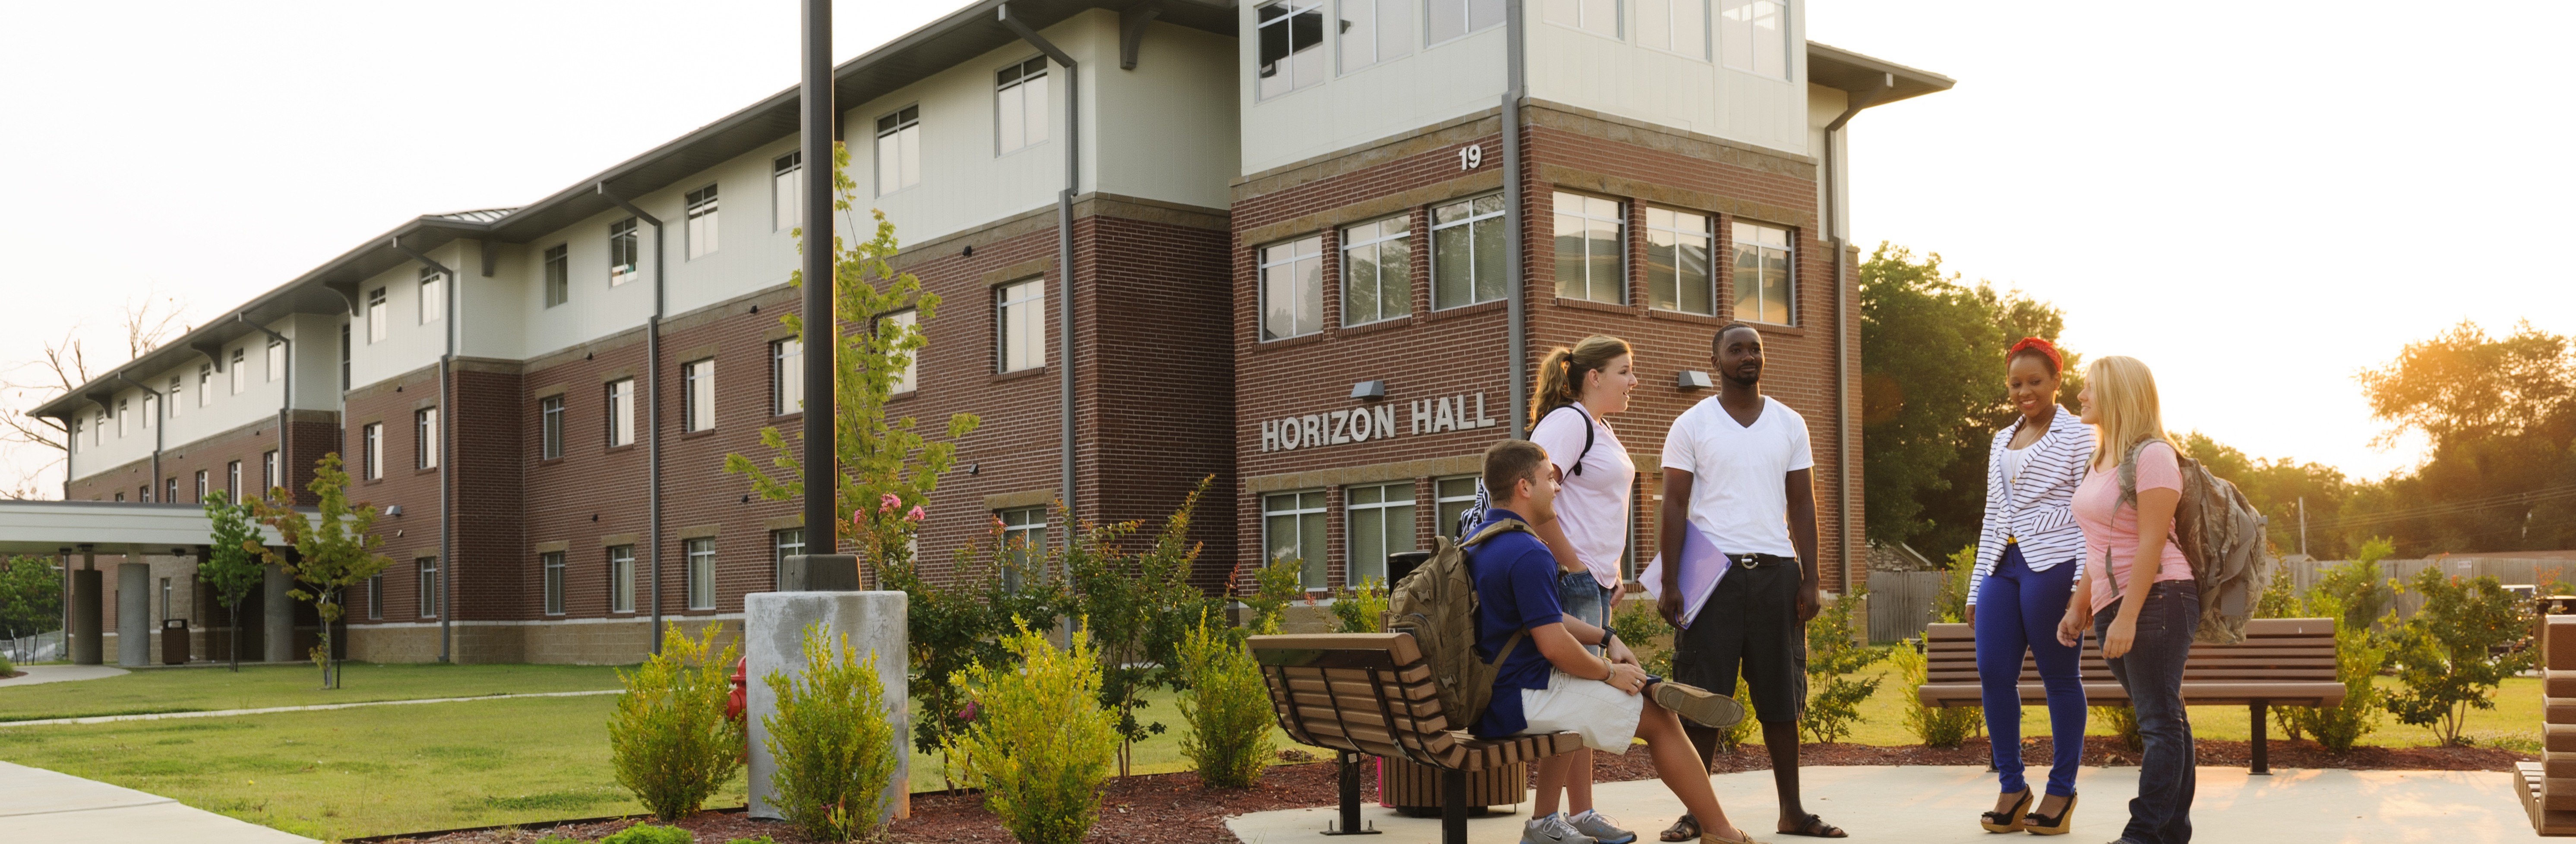 Residence Halls Supporting student growth outside of the classroom.